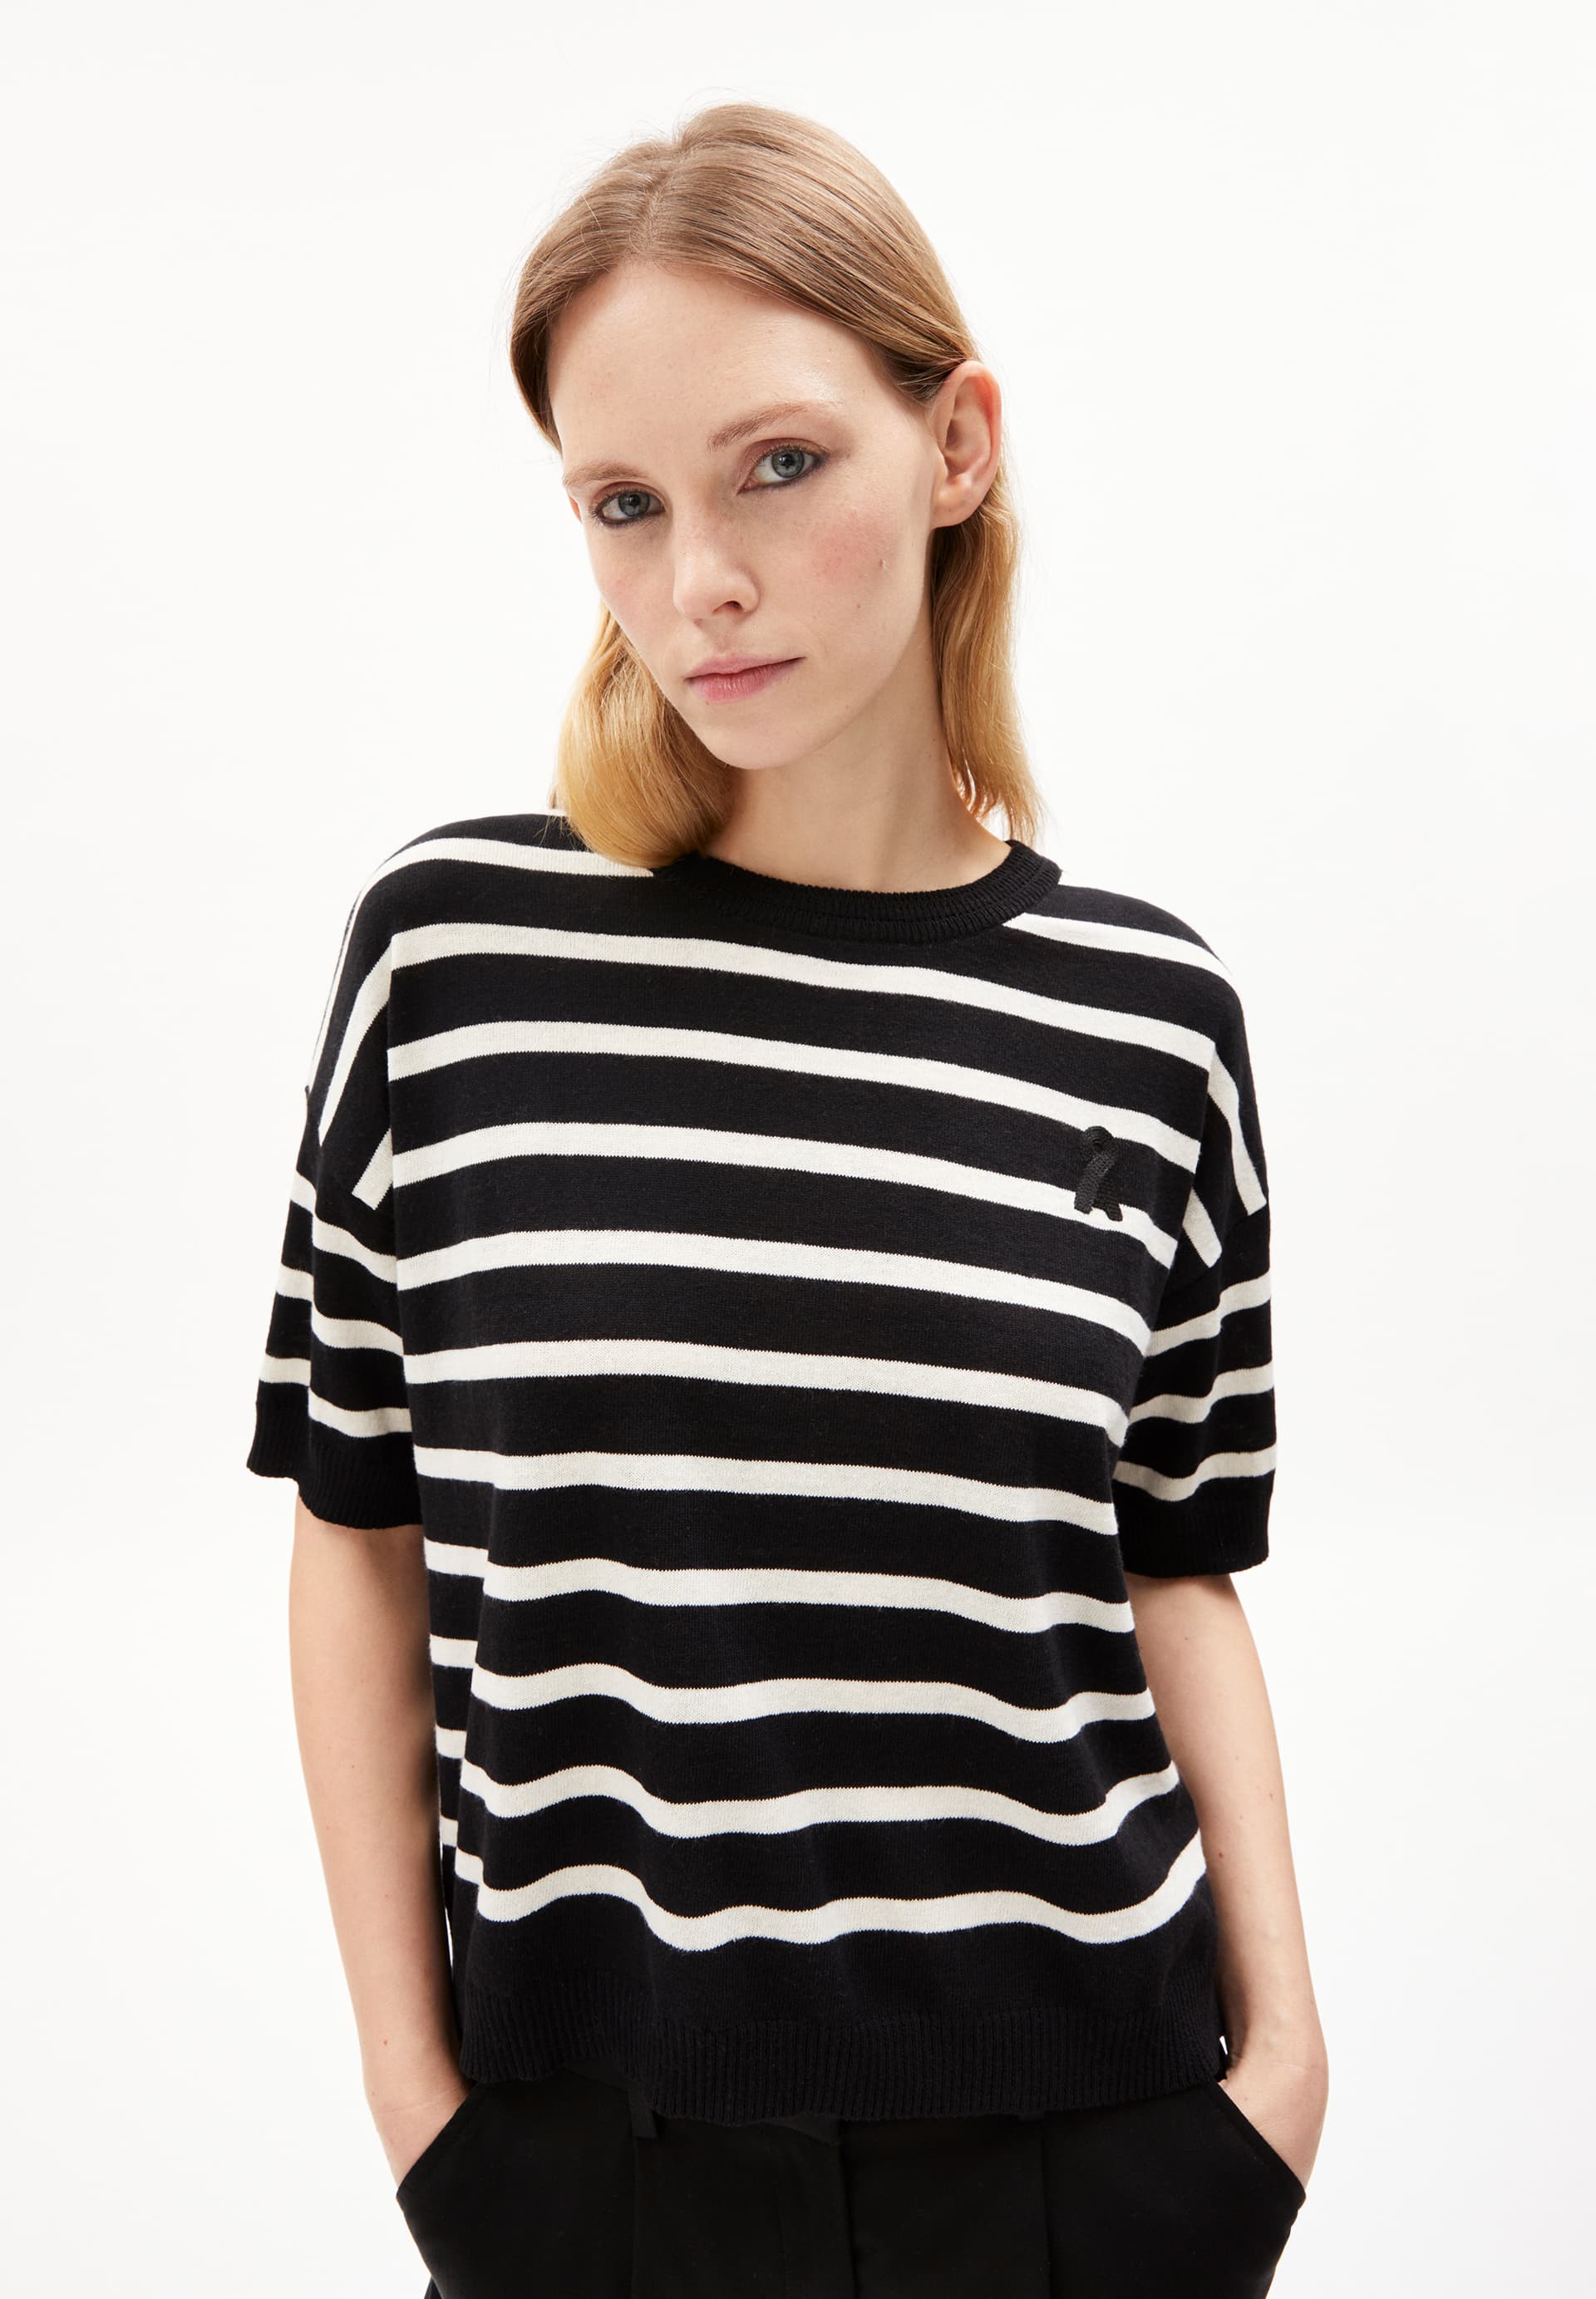 LILLAAS STRIPES Knit Shirt Relaxed Fit made of Linen-Mix